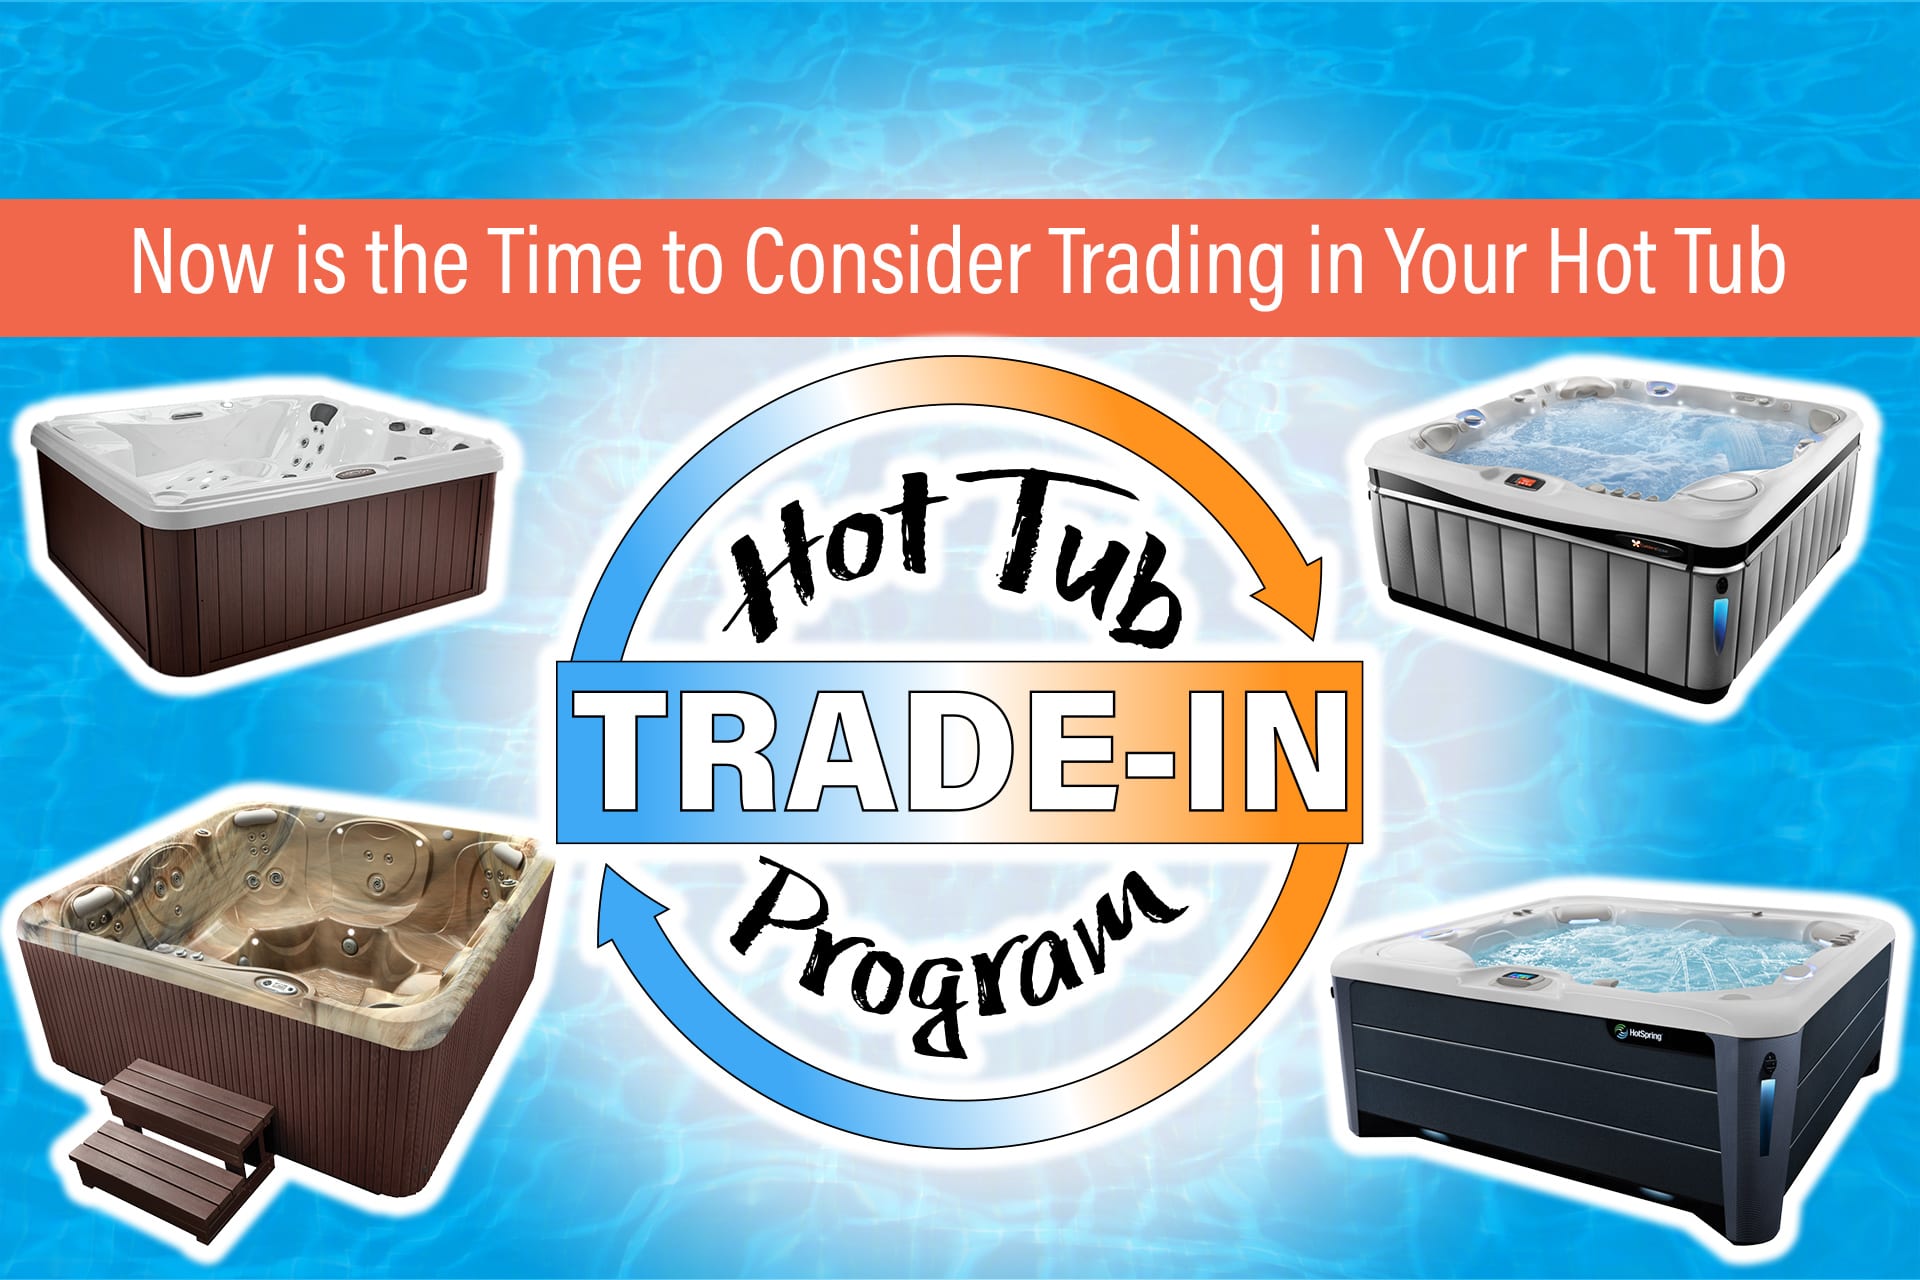 Now is the Time to Consider Trading in Your Hot Tub